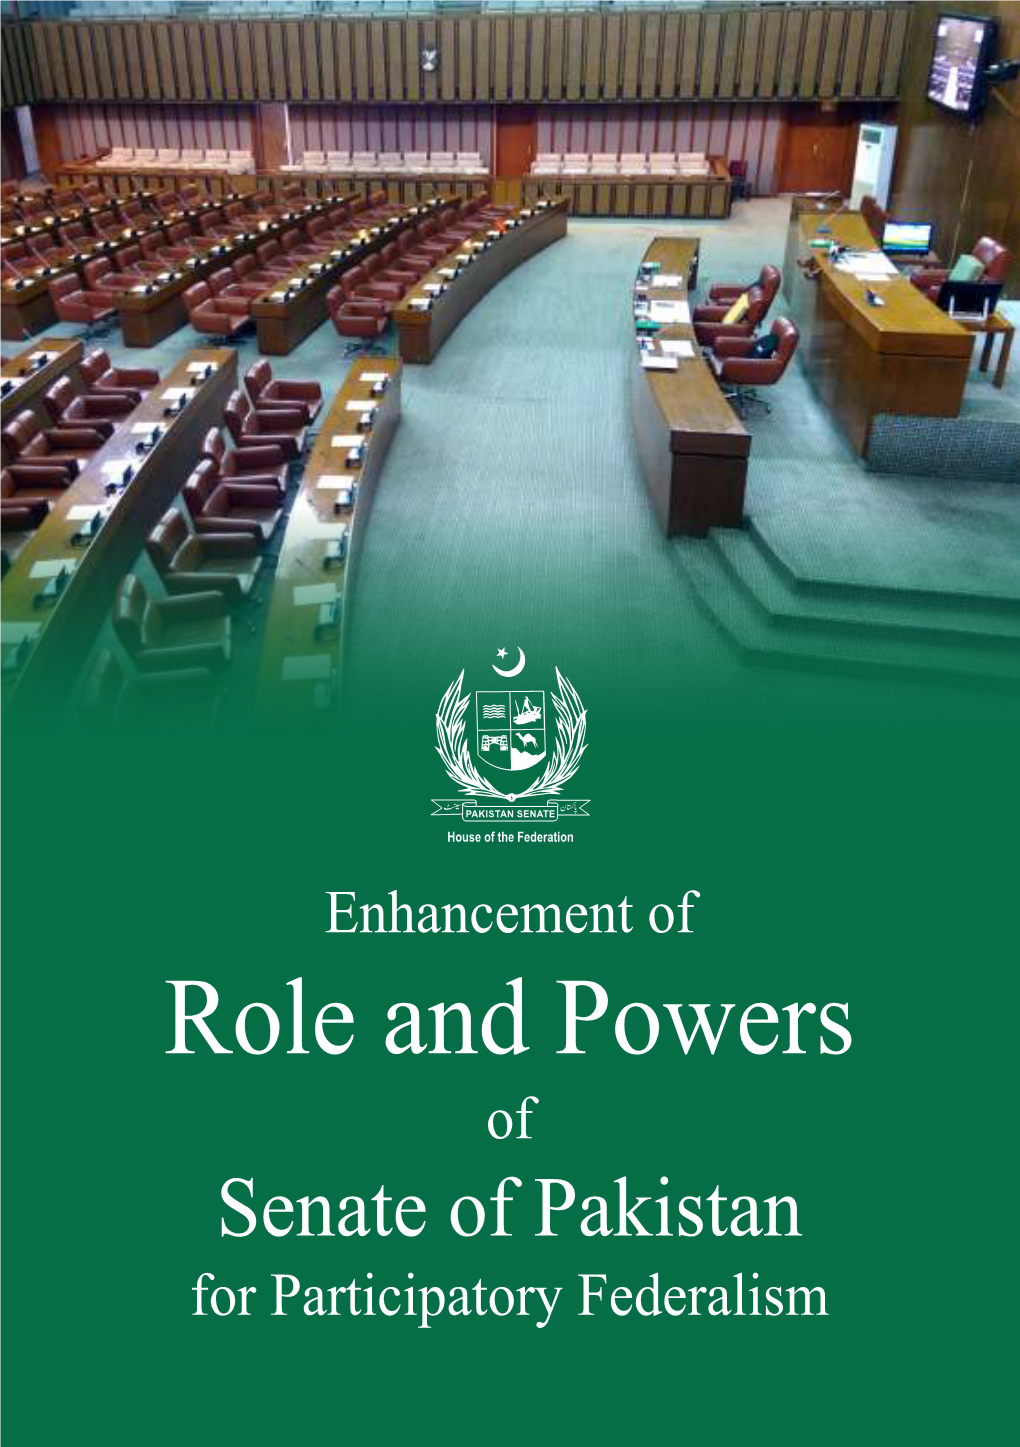 Enhancement of Role and Powers (Green)